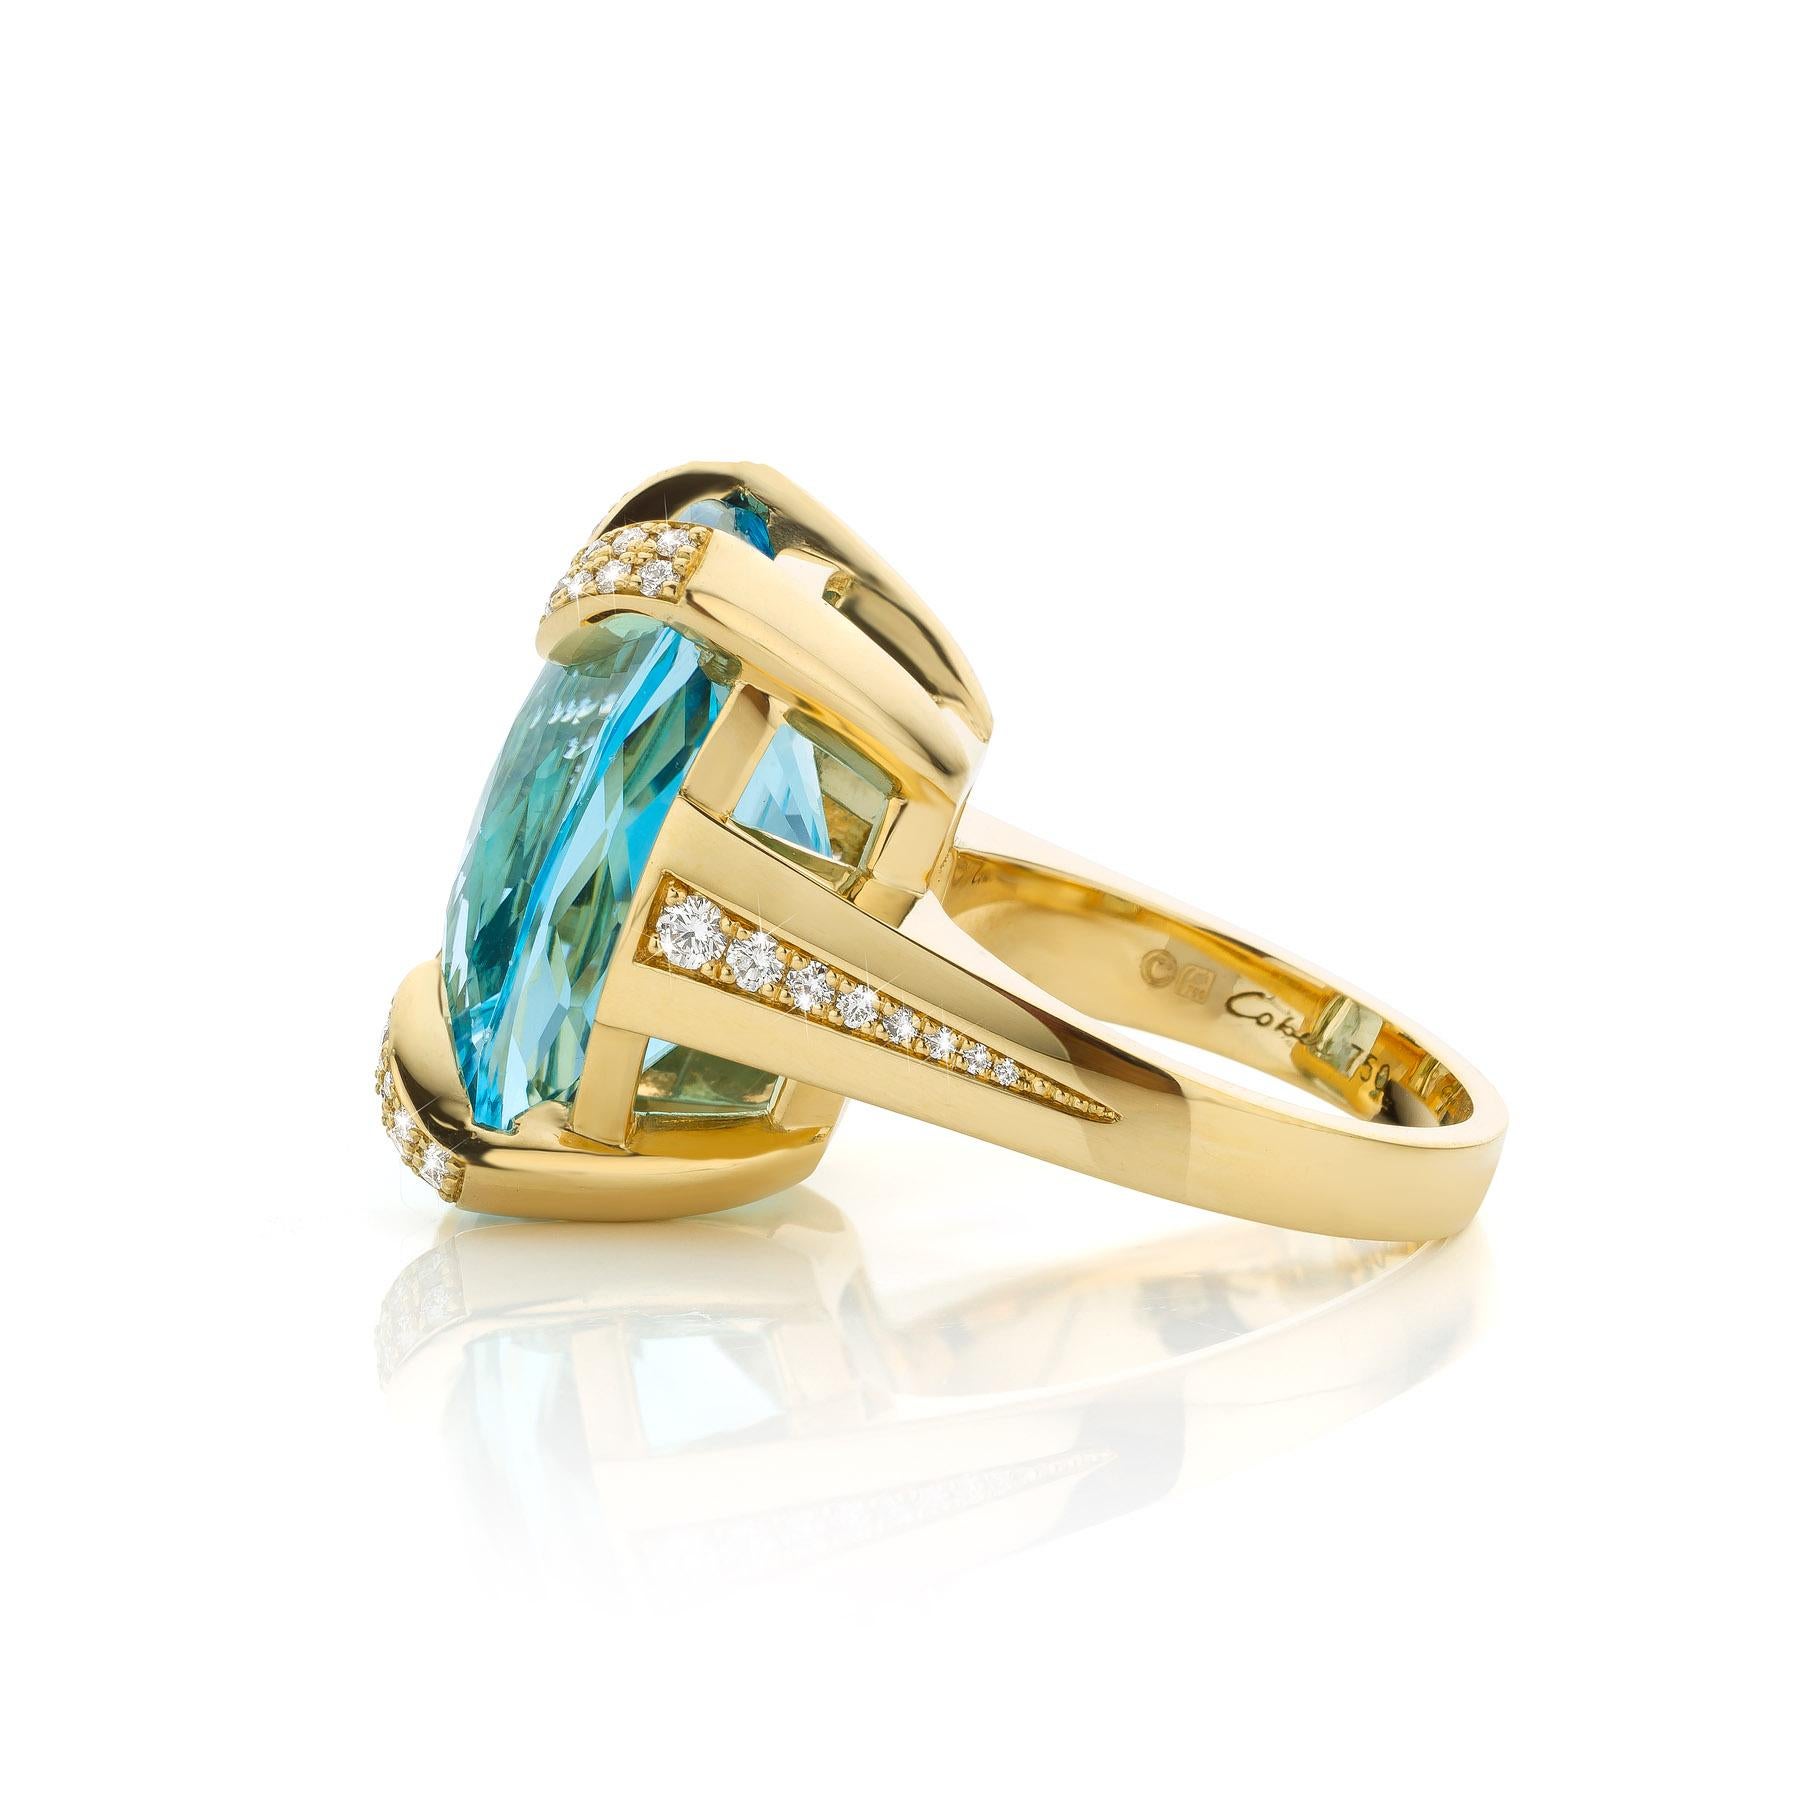 For Sale:  Cober “Skinny Dipping” with 15 Carat Swiss blue Topaz and Diamonds Fashion Ring  5